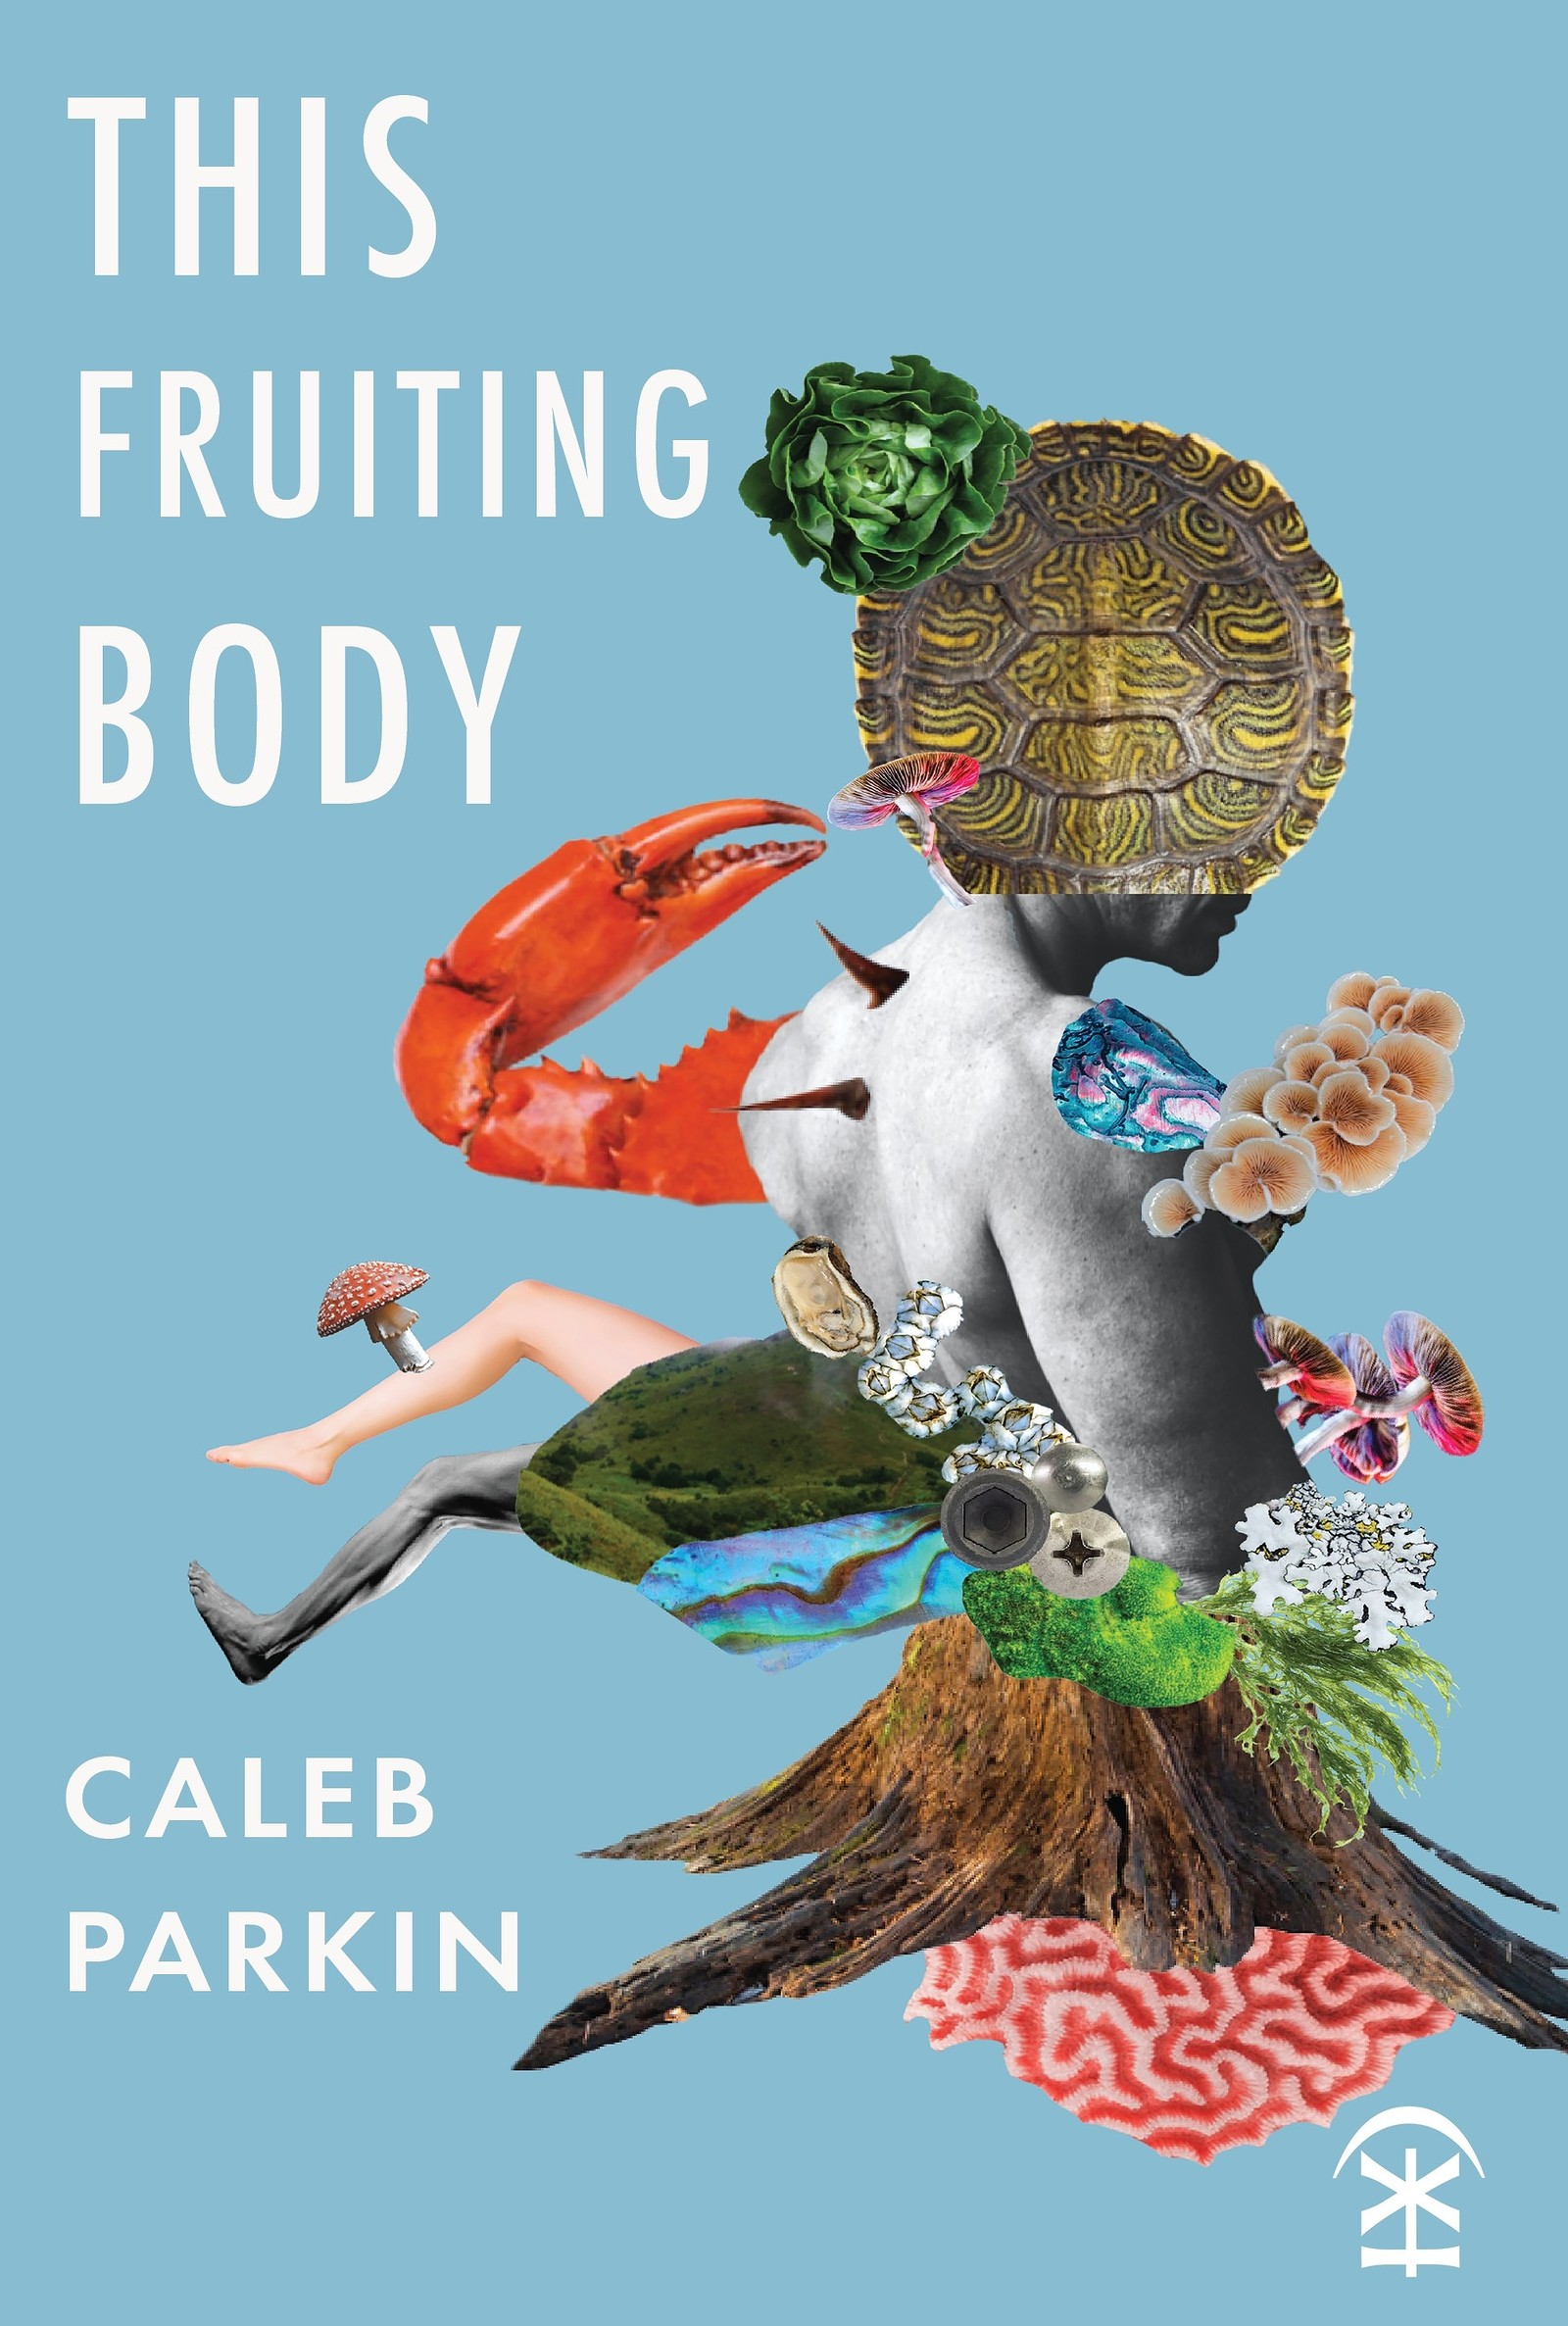 Fruiting Boaty: 'This Fruiting Body' launch party at Flower of Bristol